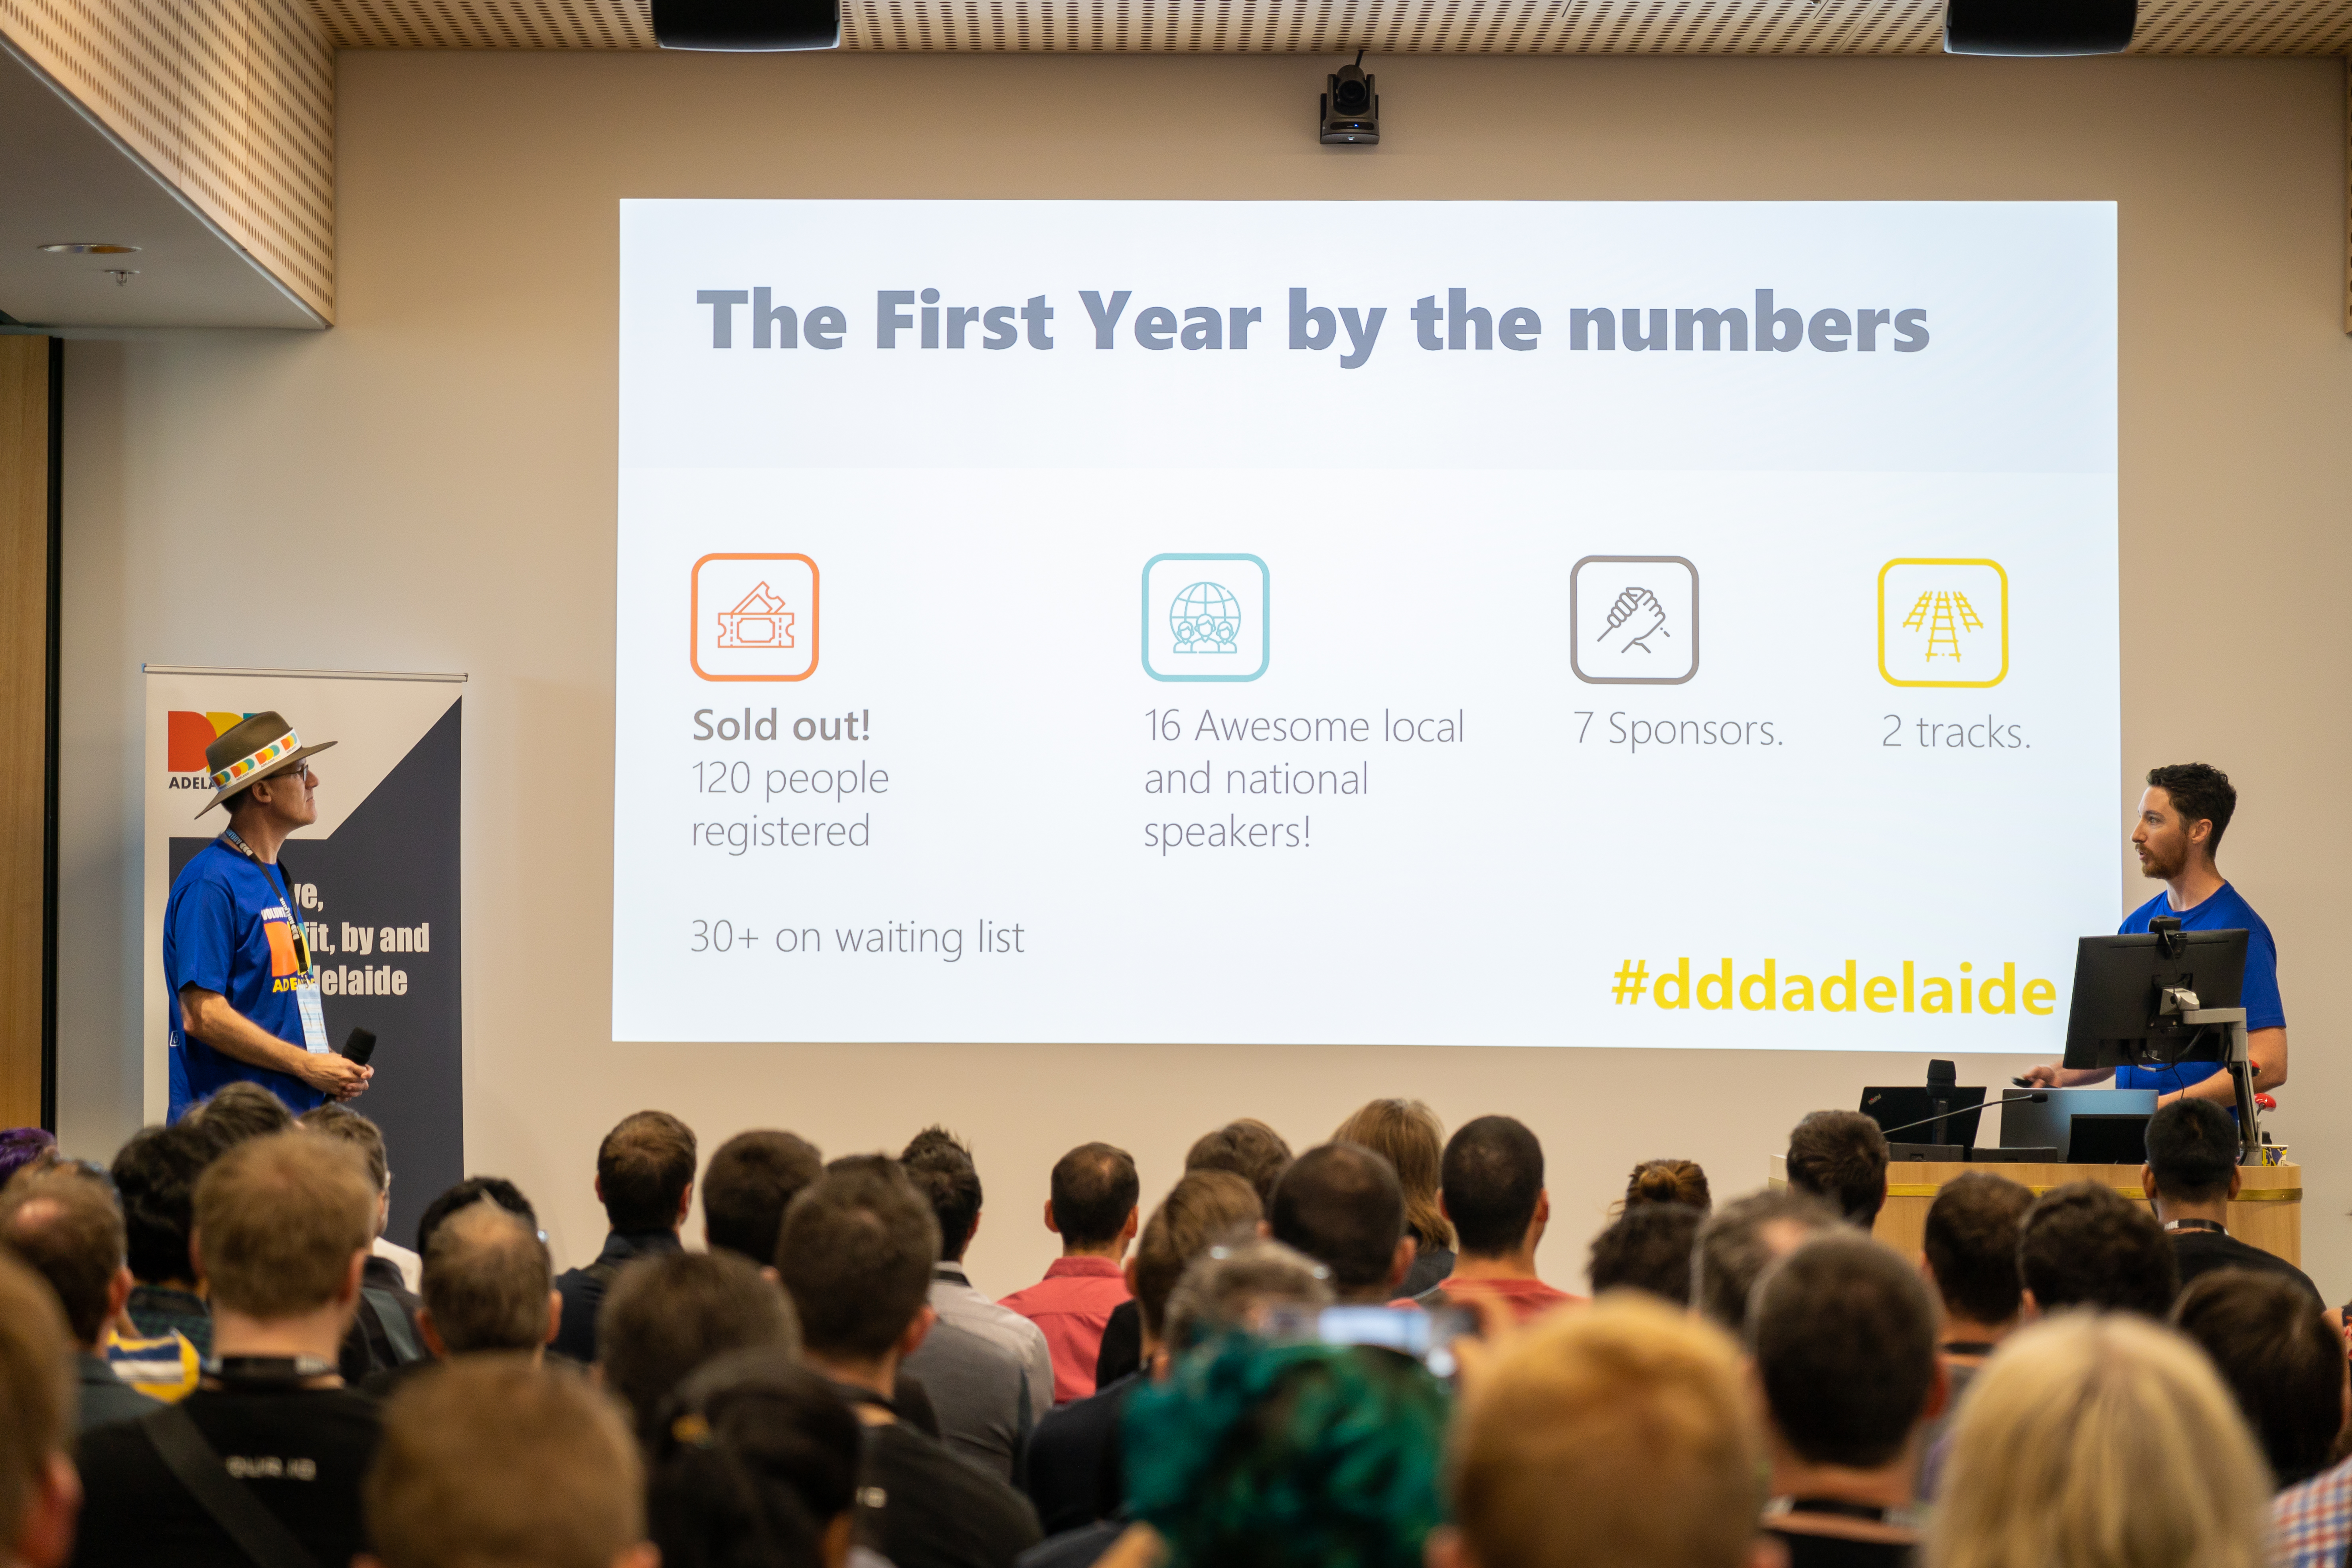 DDD Adelaide by the numbers